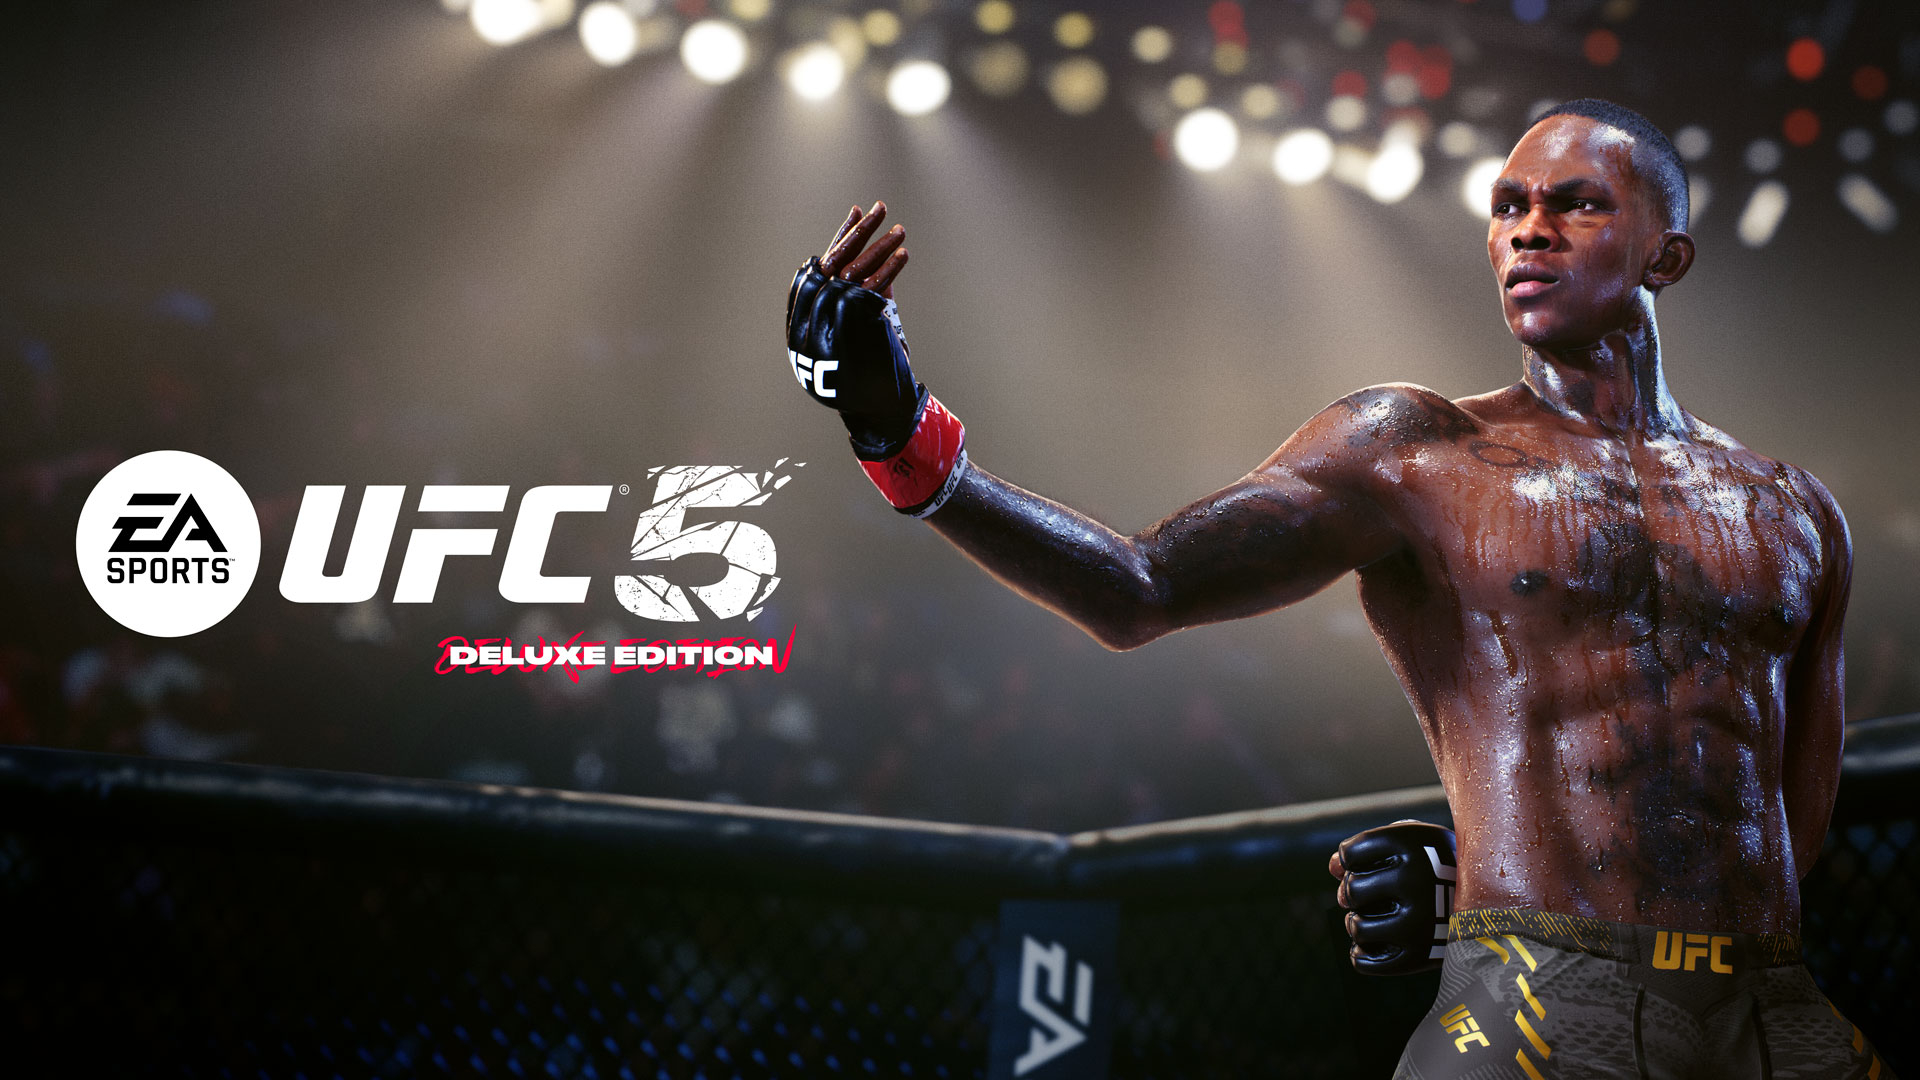 UFC 5 preview sees new brawler channeling Fight Night Round 3 GamesRadar+